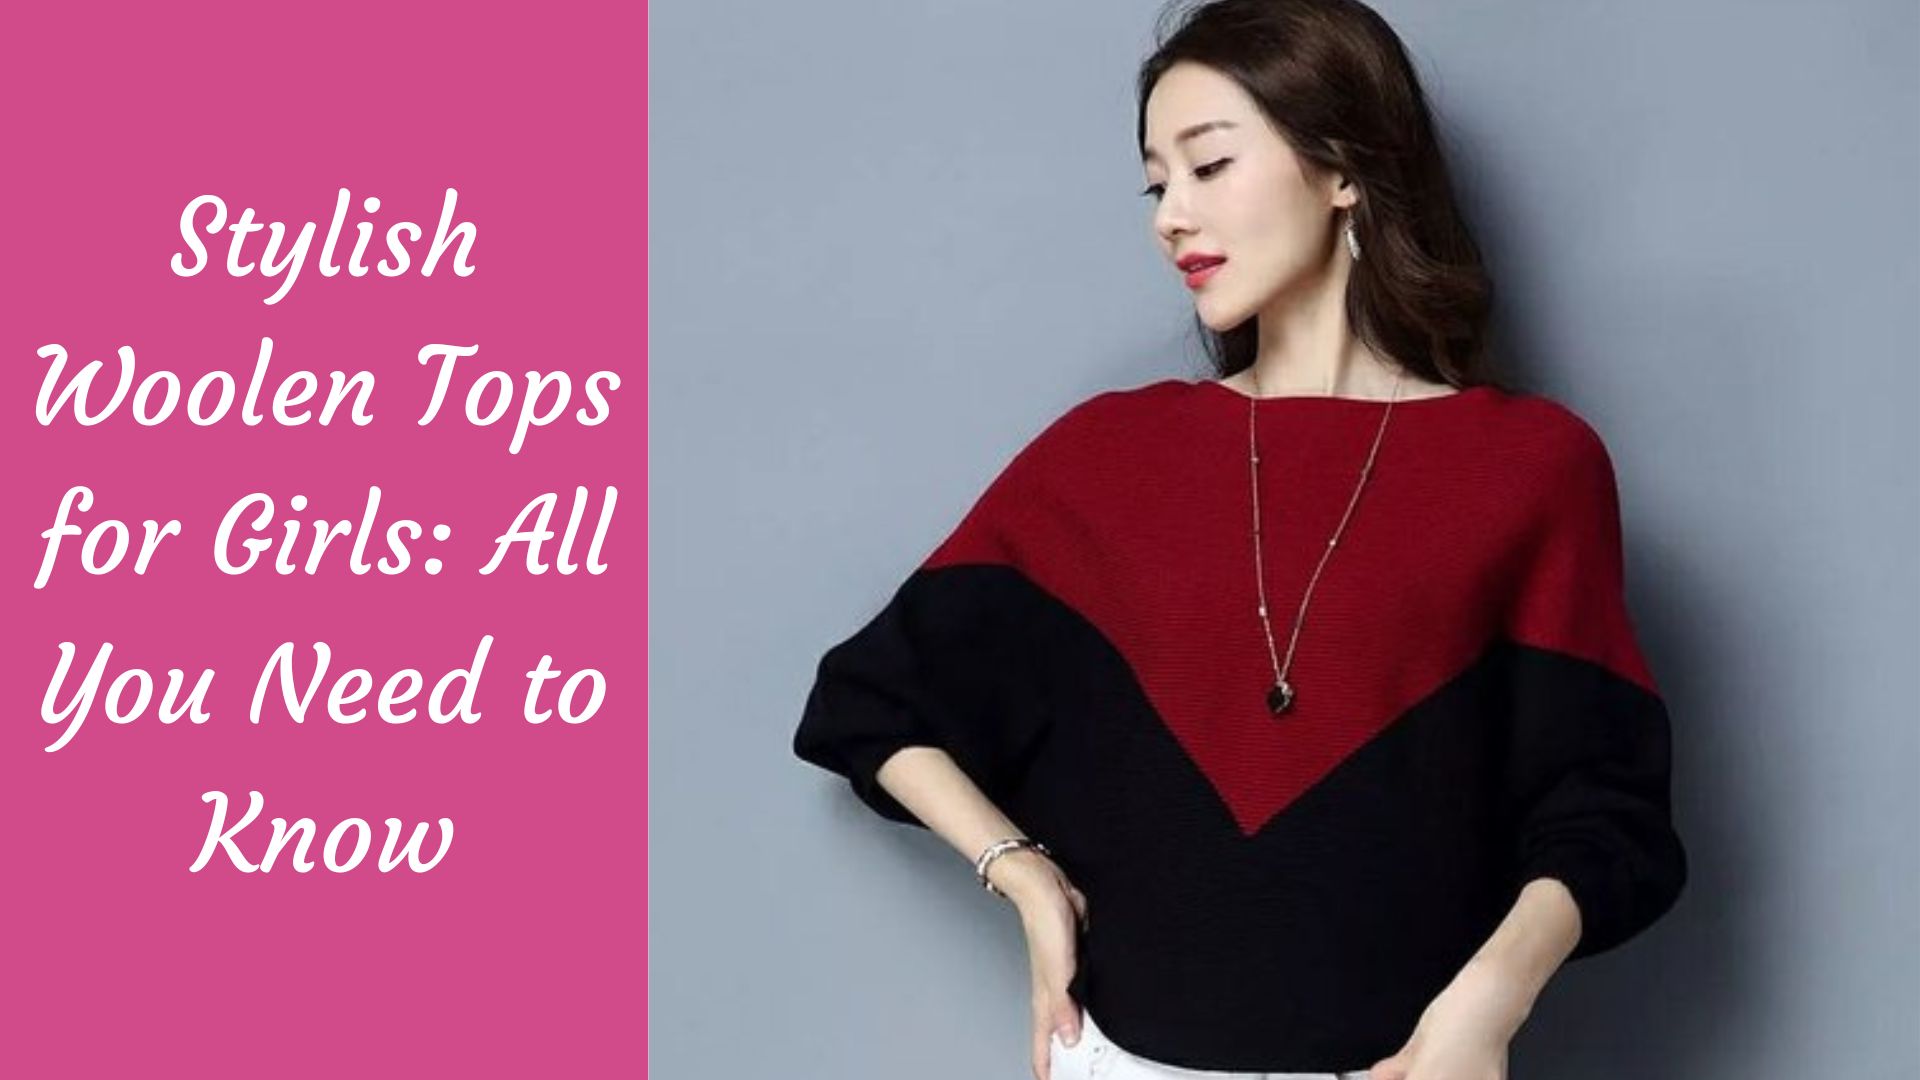 Stylish Woolen Tops for Girls: All You Need to Know - The Kosha Journal